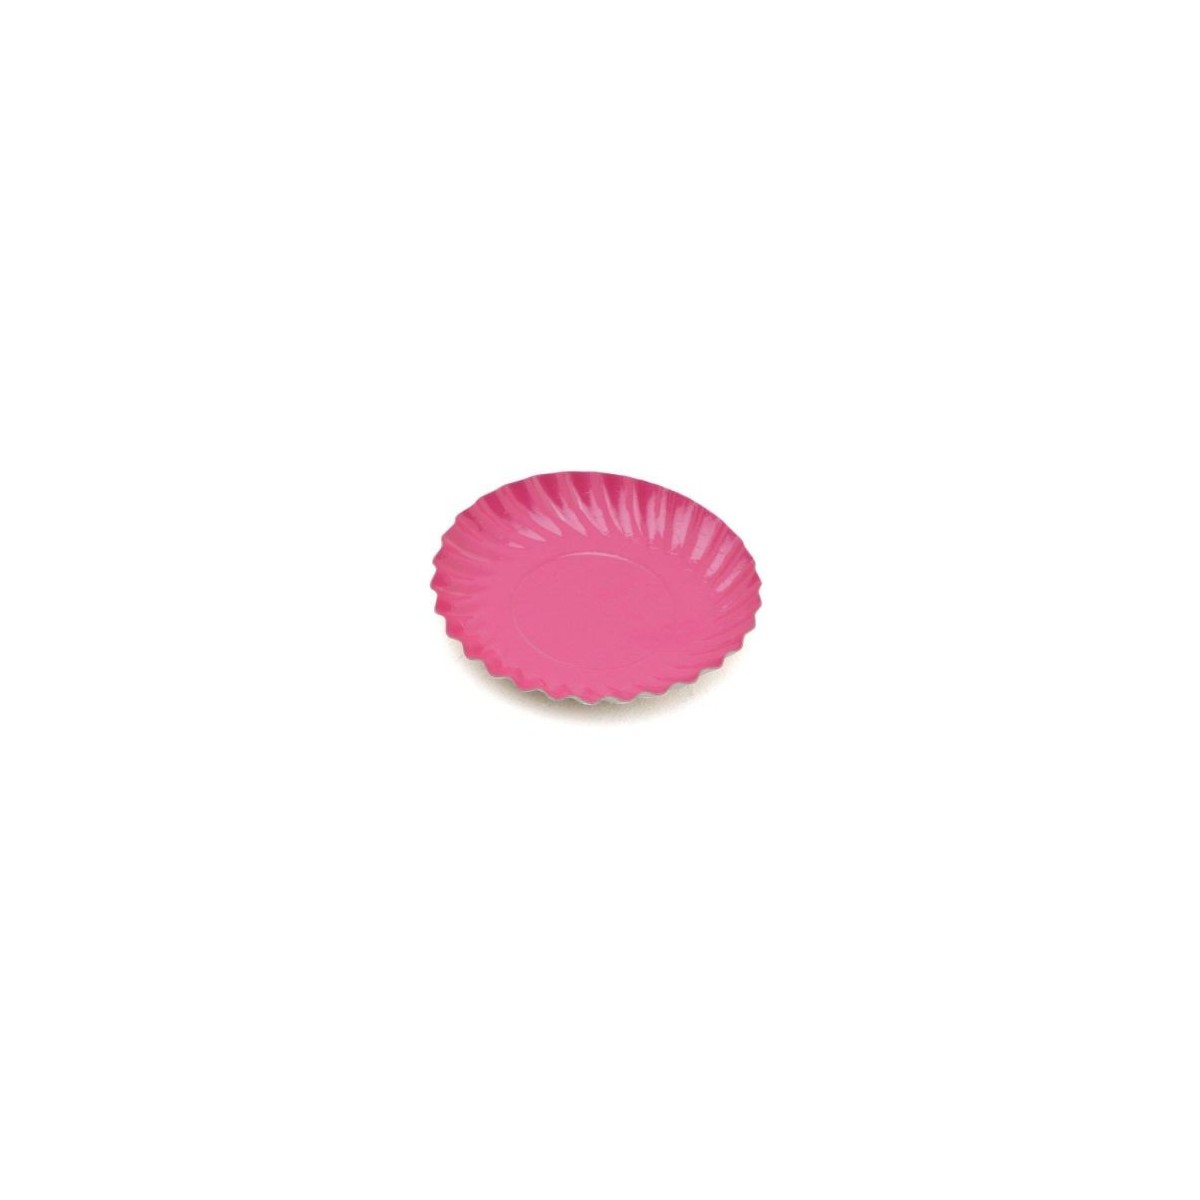 PLATE CARDBOARD ROUND FUSCHIA Ø 88 MM 100 PIECES FOSTPLUS INCLUDED  PACKAGE 